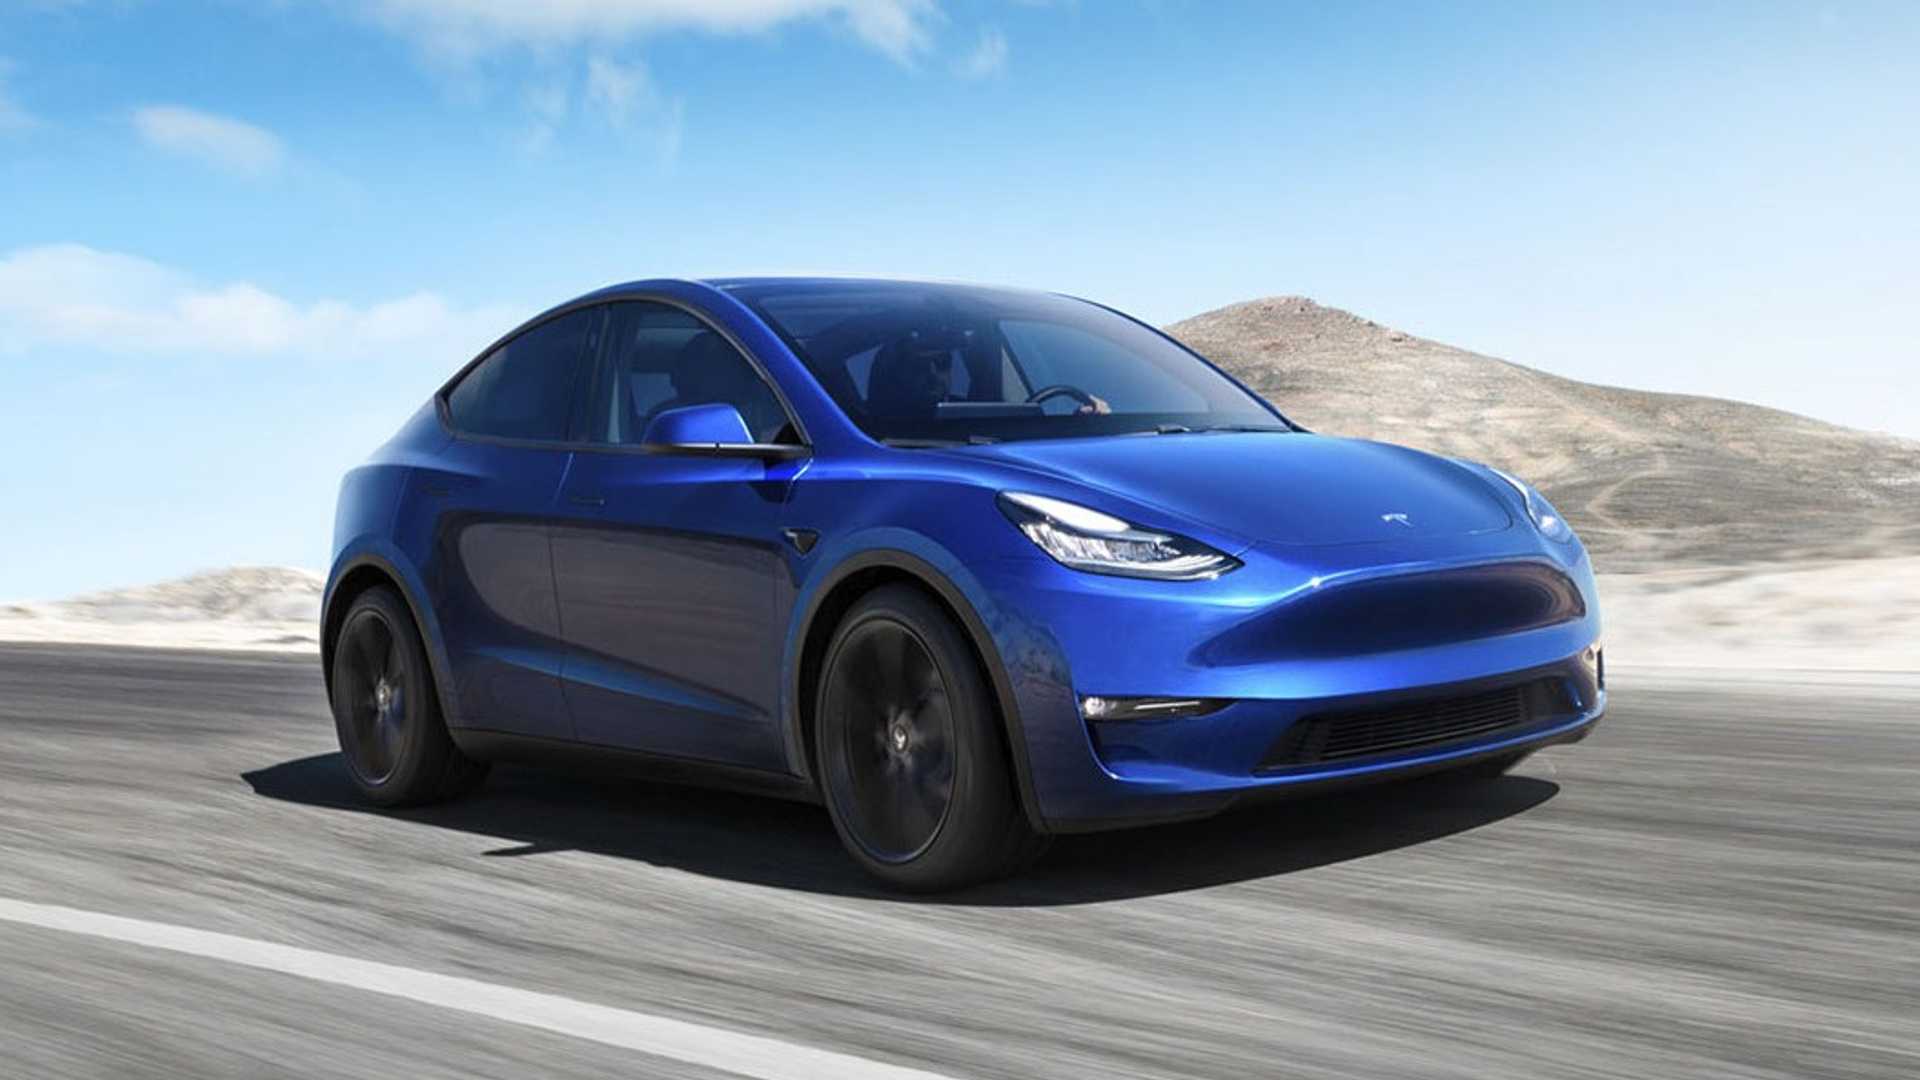 2021 Tesla Model Y Wallpapers 11 HD Images   NewCarCars